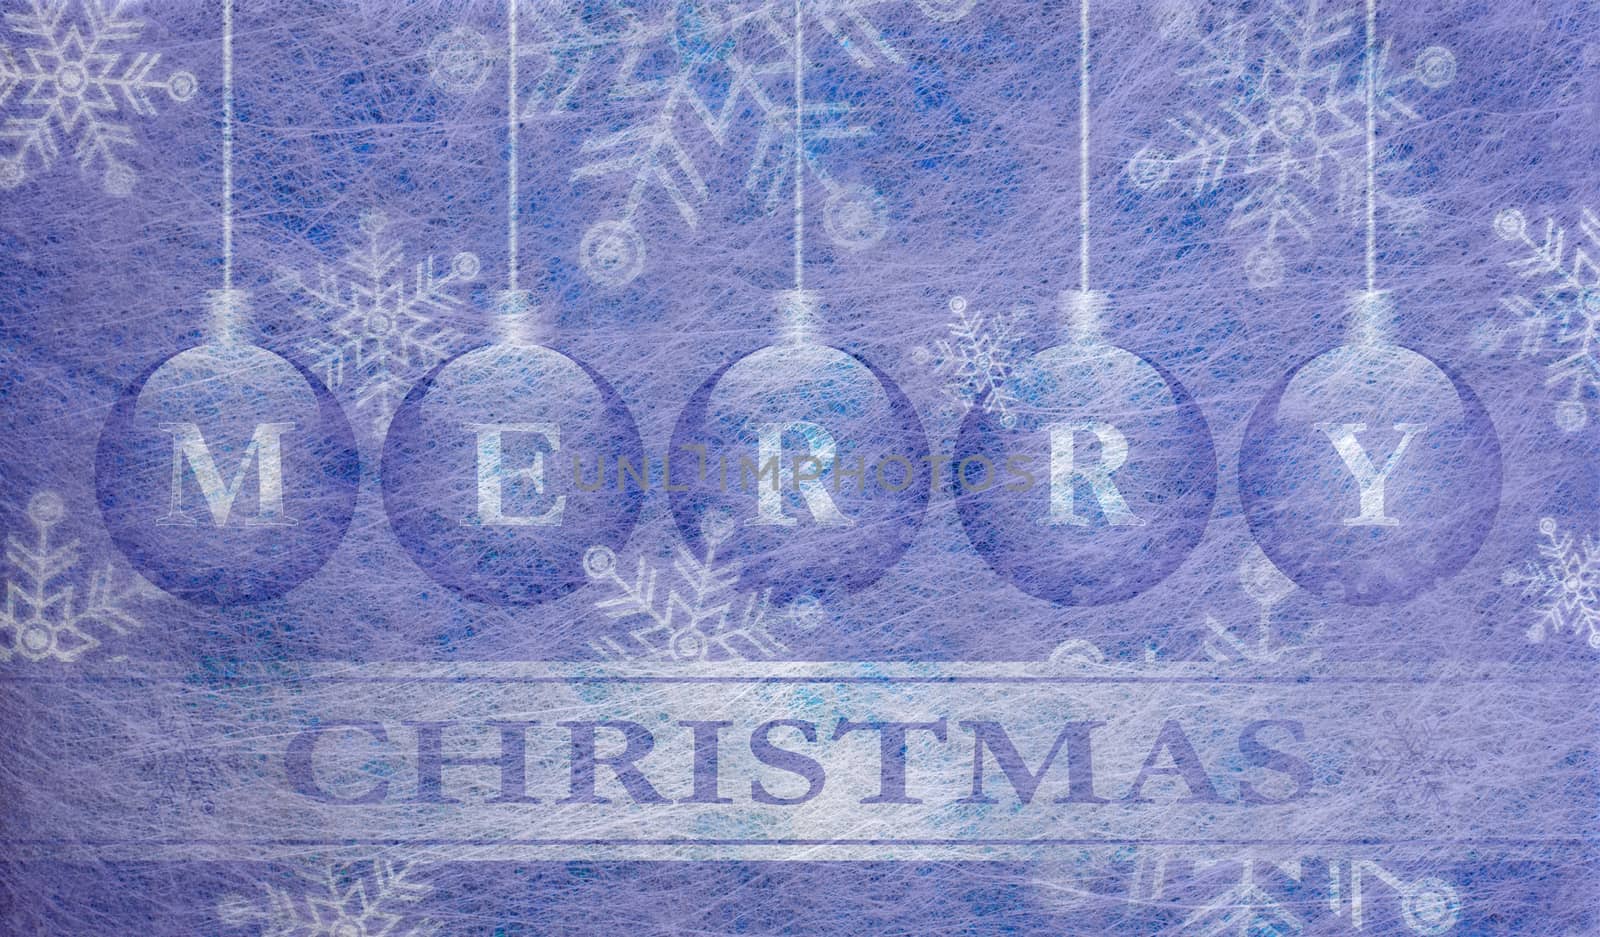 Grey fiber fabric and blue glitter film and christmas balls and the words Merry Christmas, christmas card